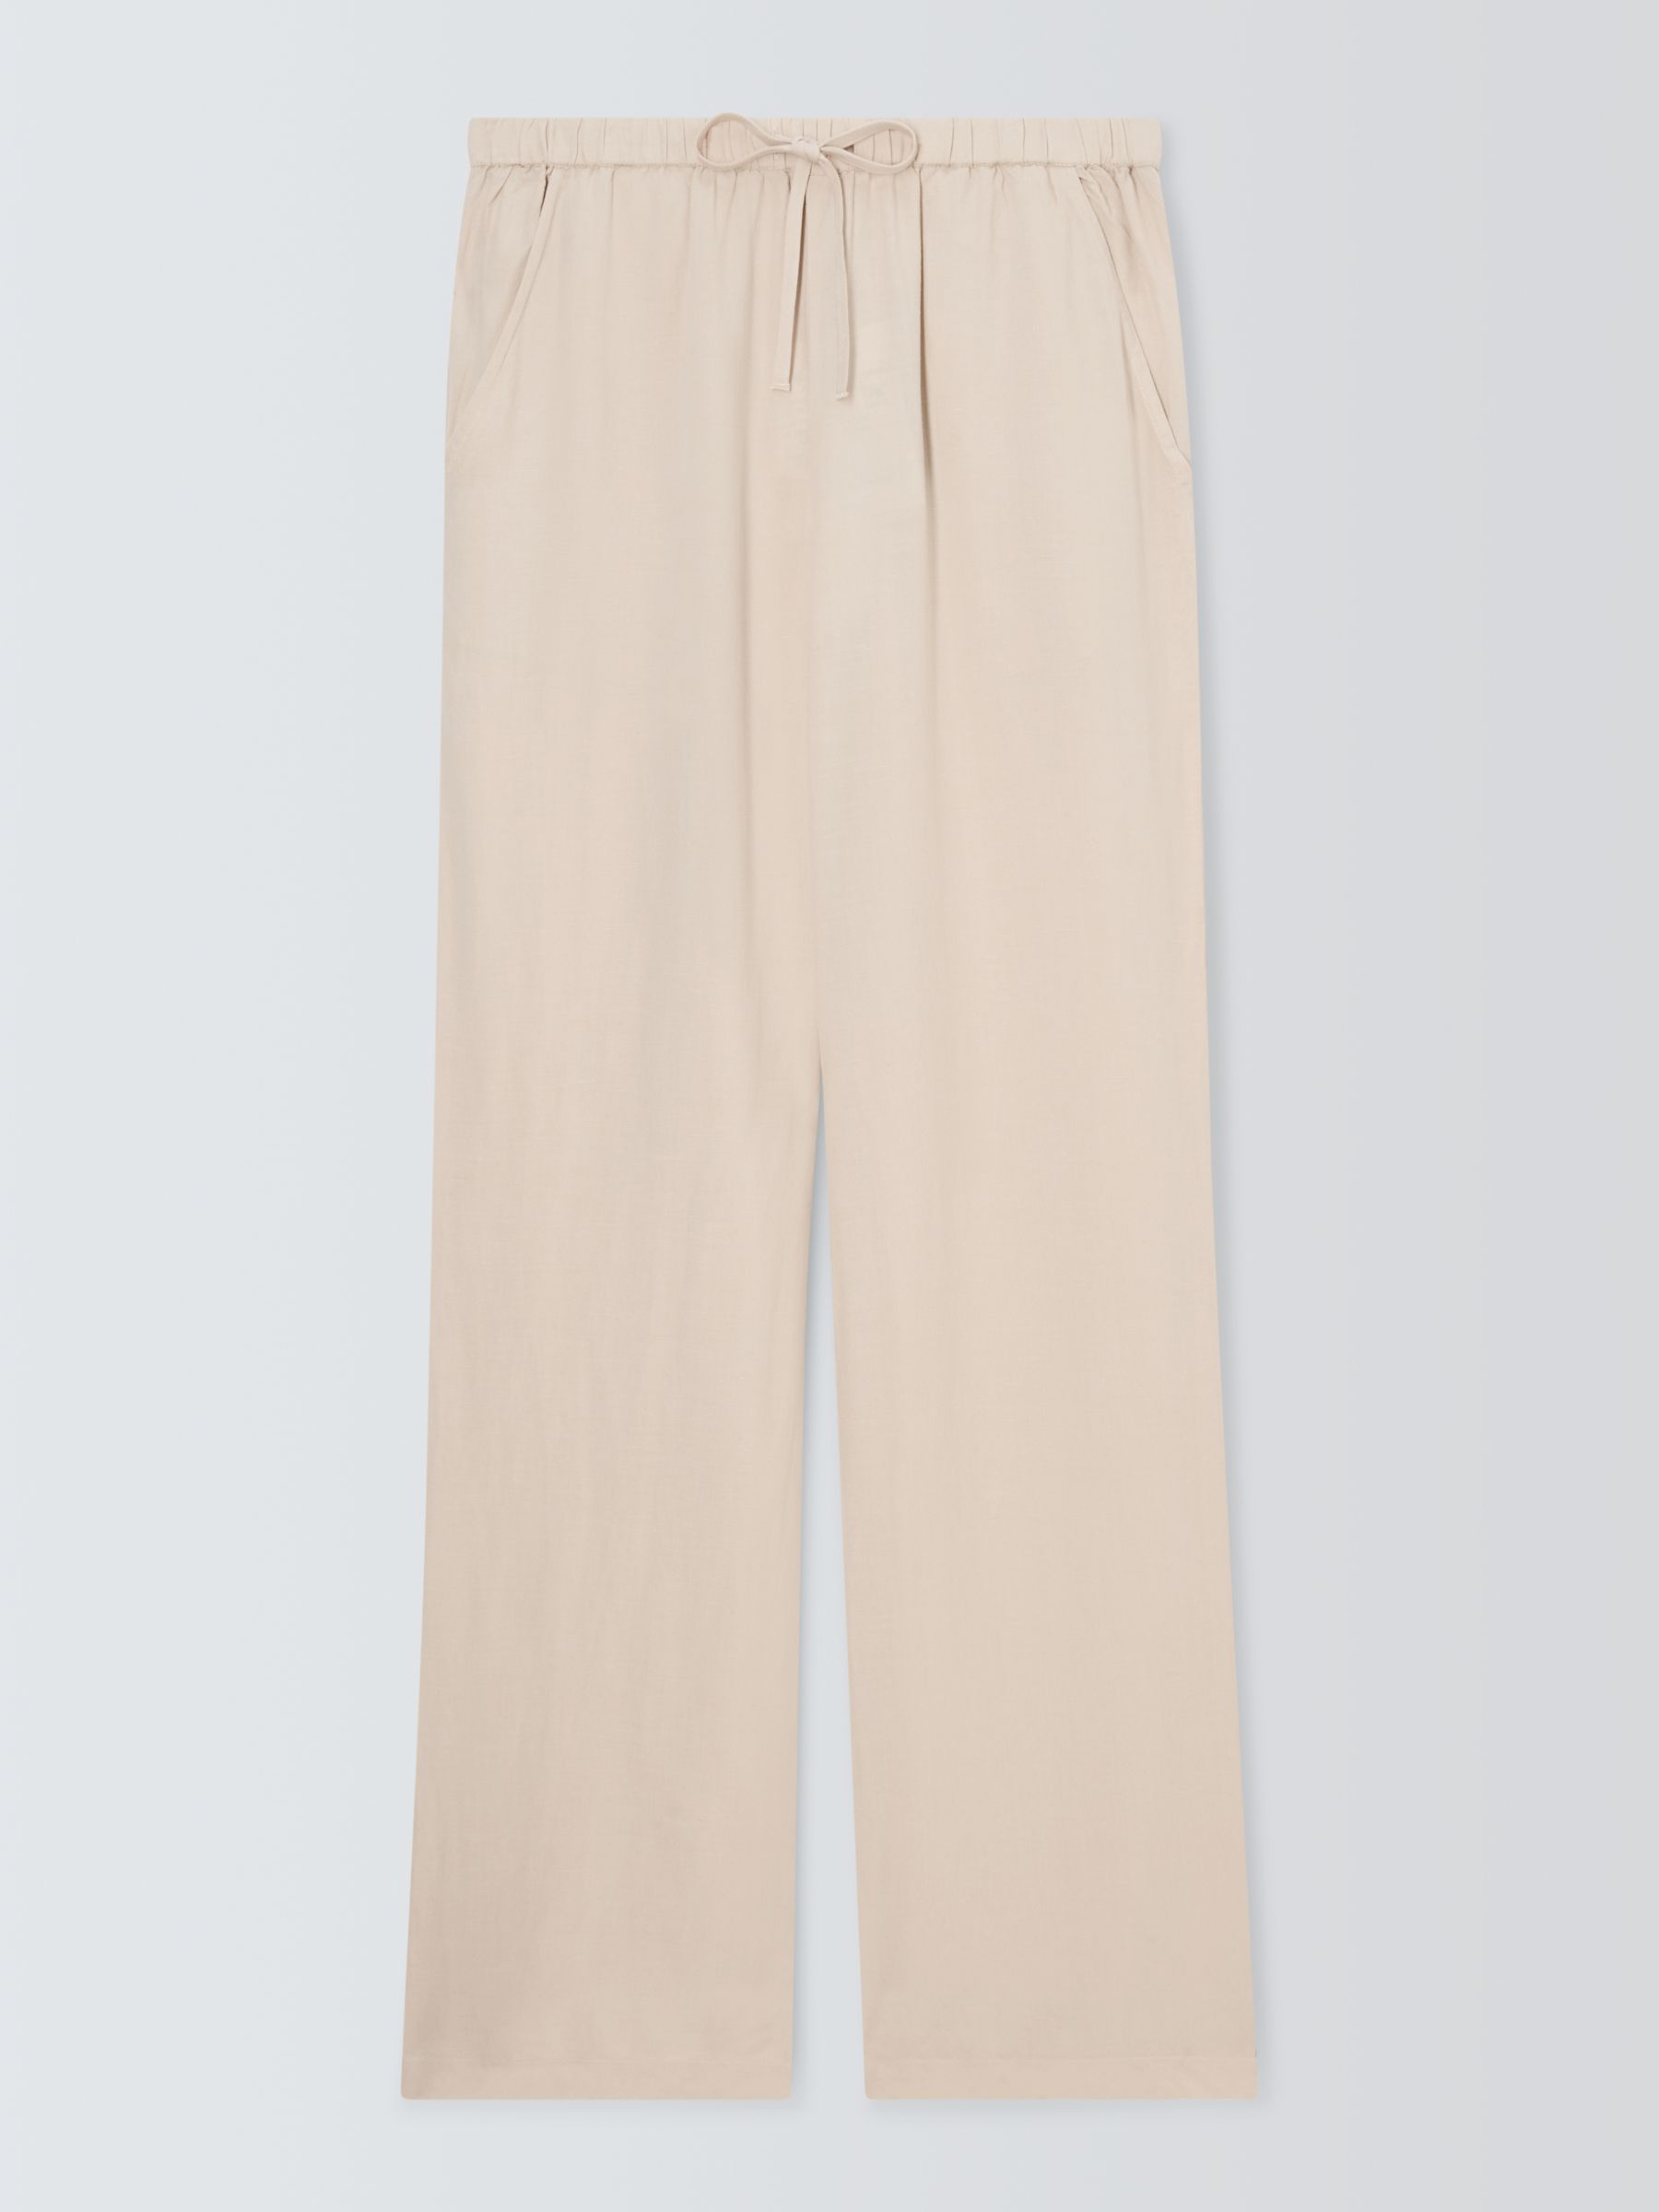 John Lewis ANYDAY Plain Tailored Linen Blend Trousers, Oatmeal, 16